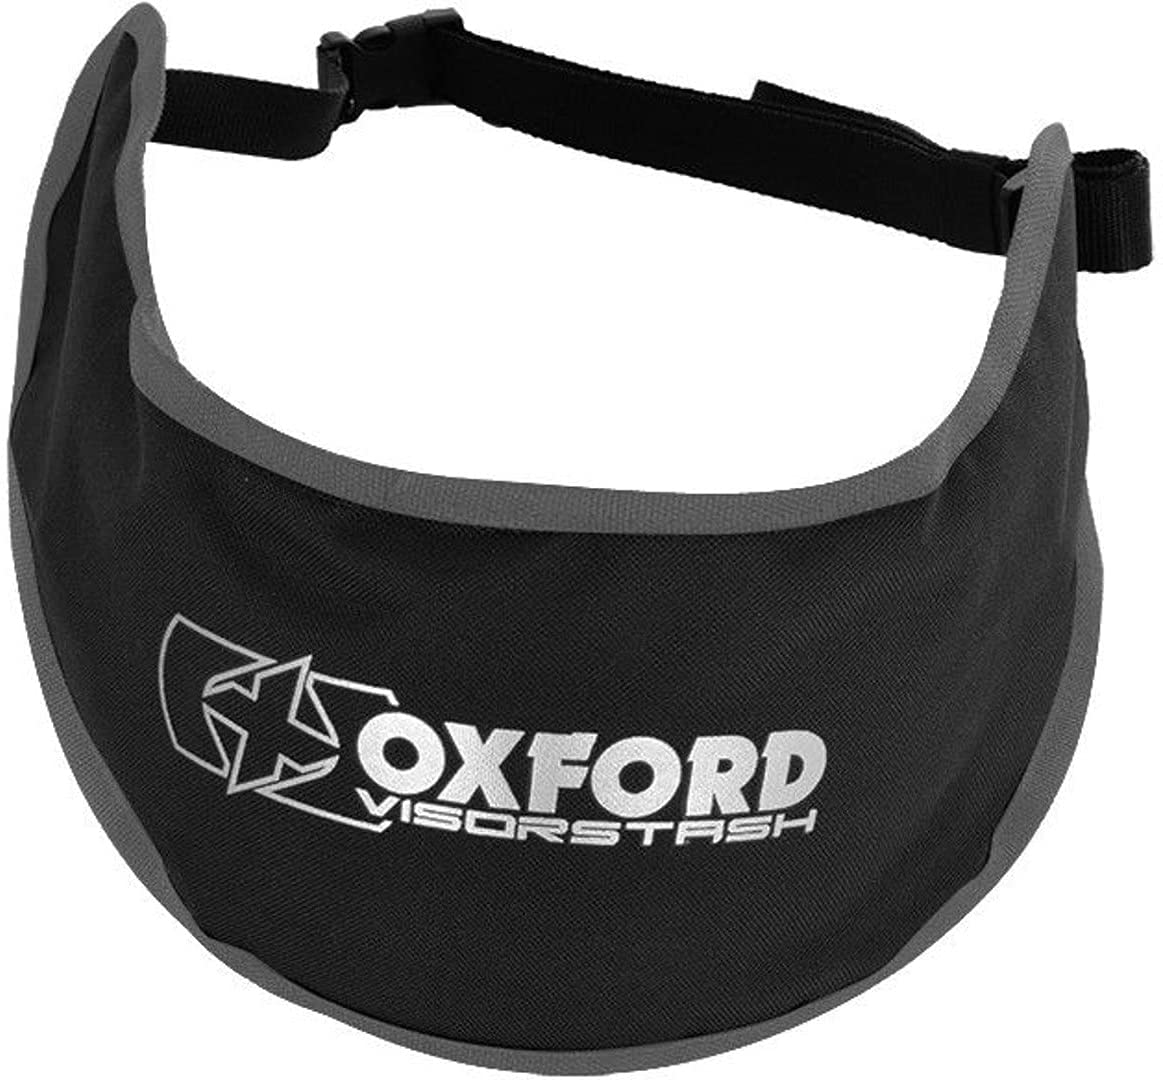 OXFORD Porte Visiere Deluxe Padded